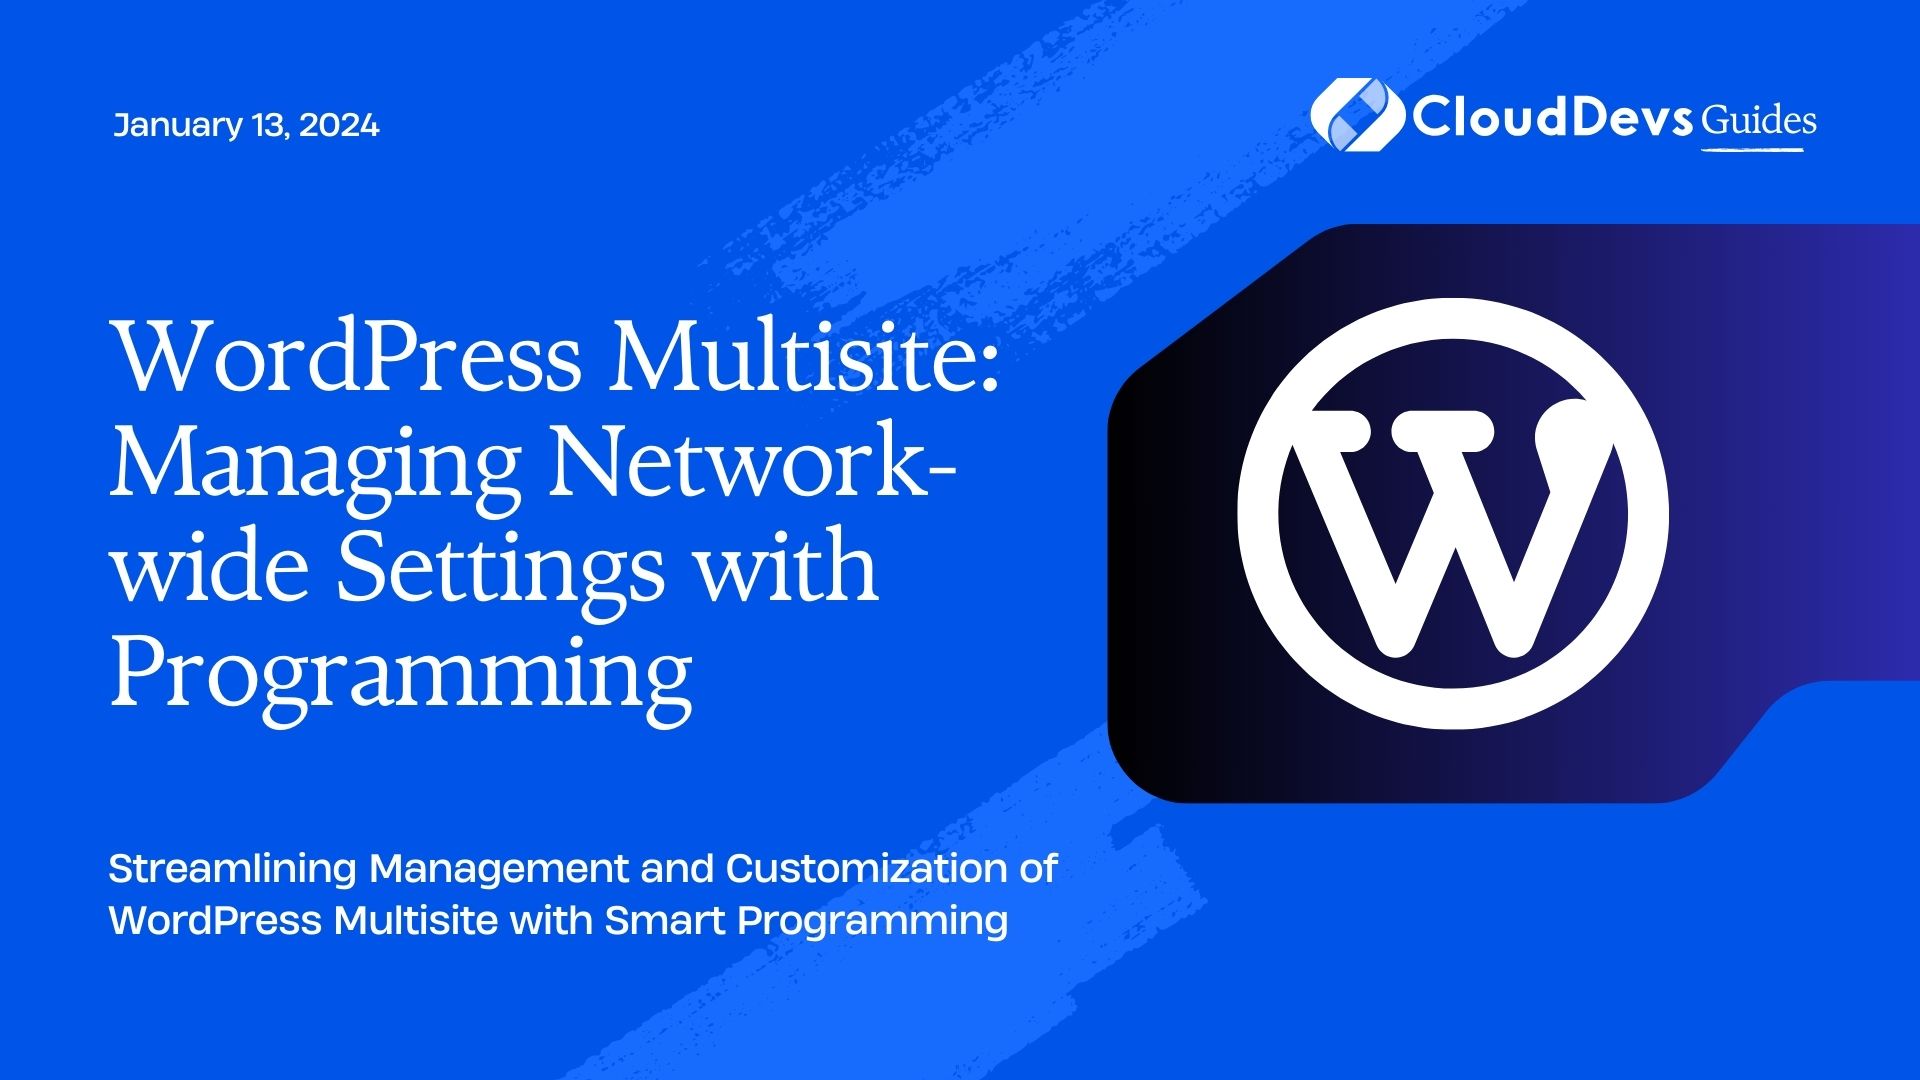 WordPress Multisite: Managing Network-wide Settings with Programming